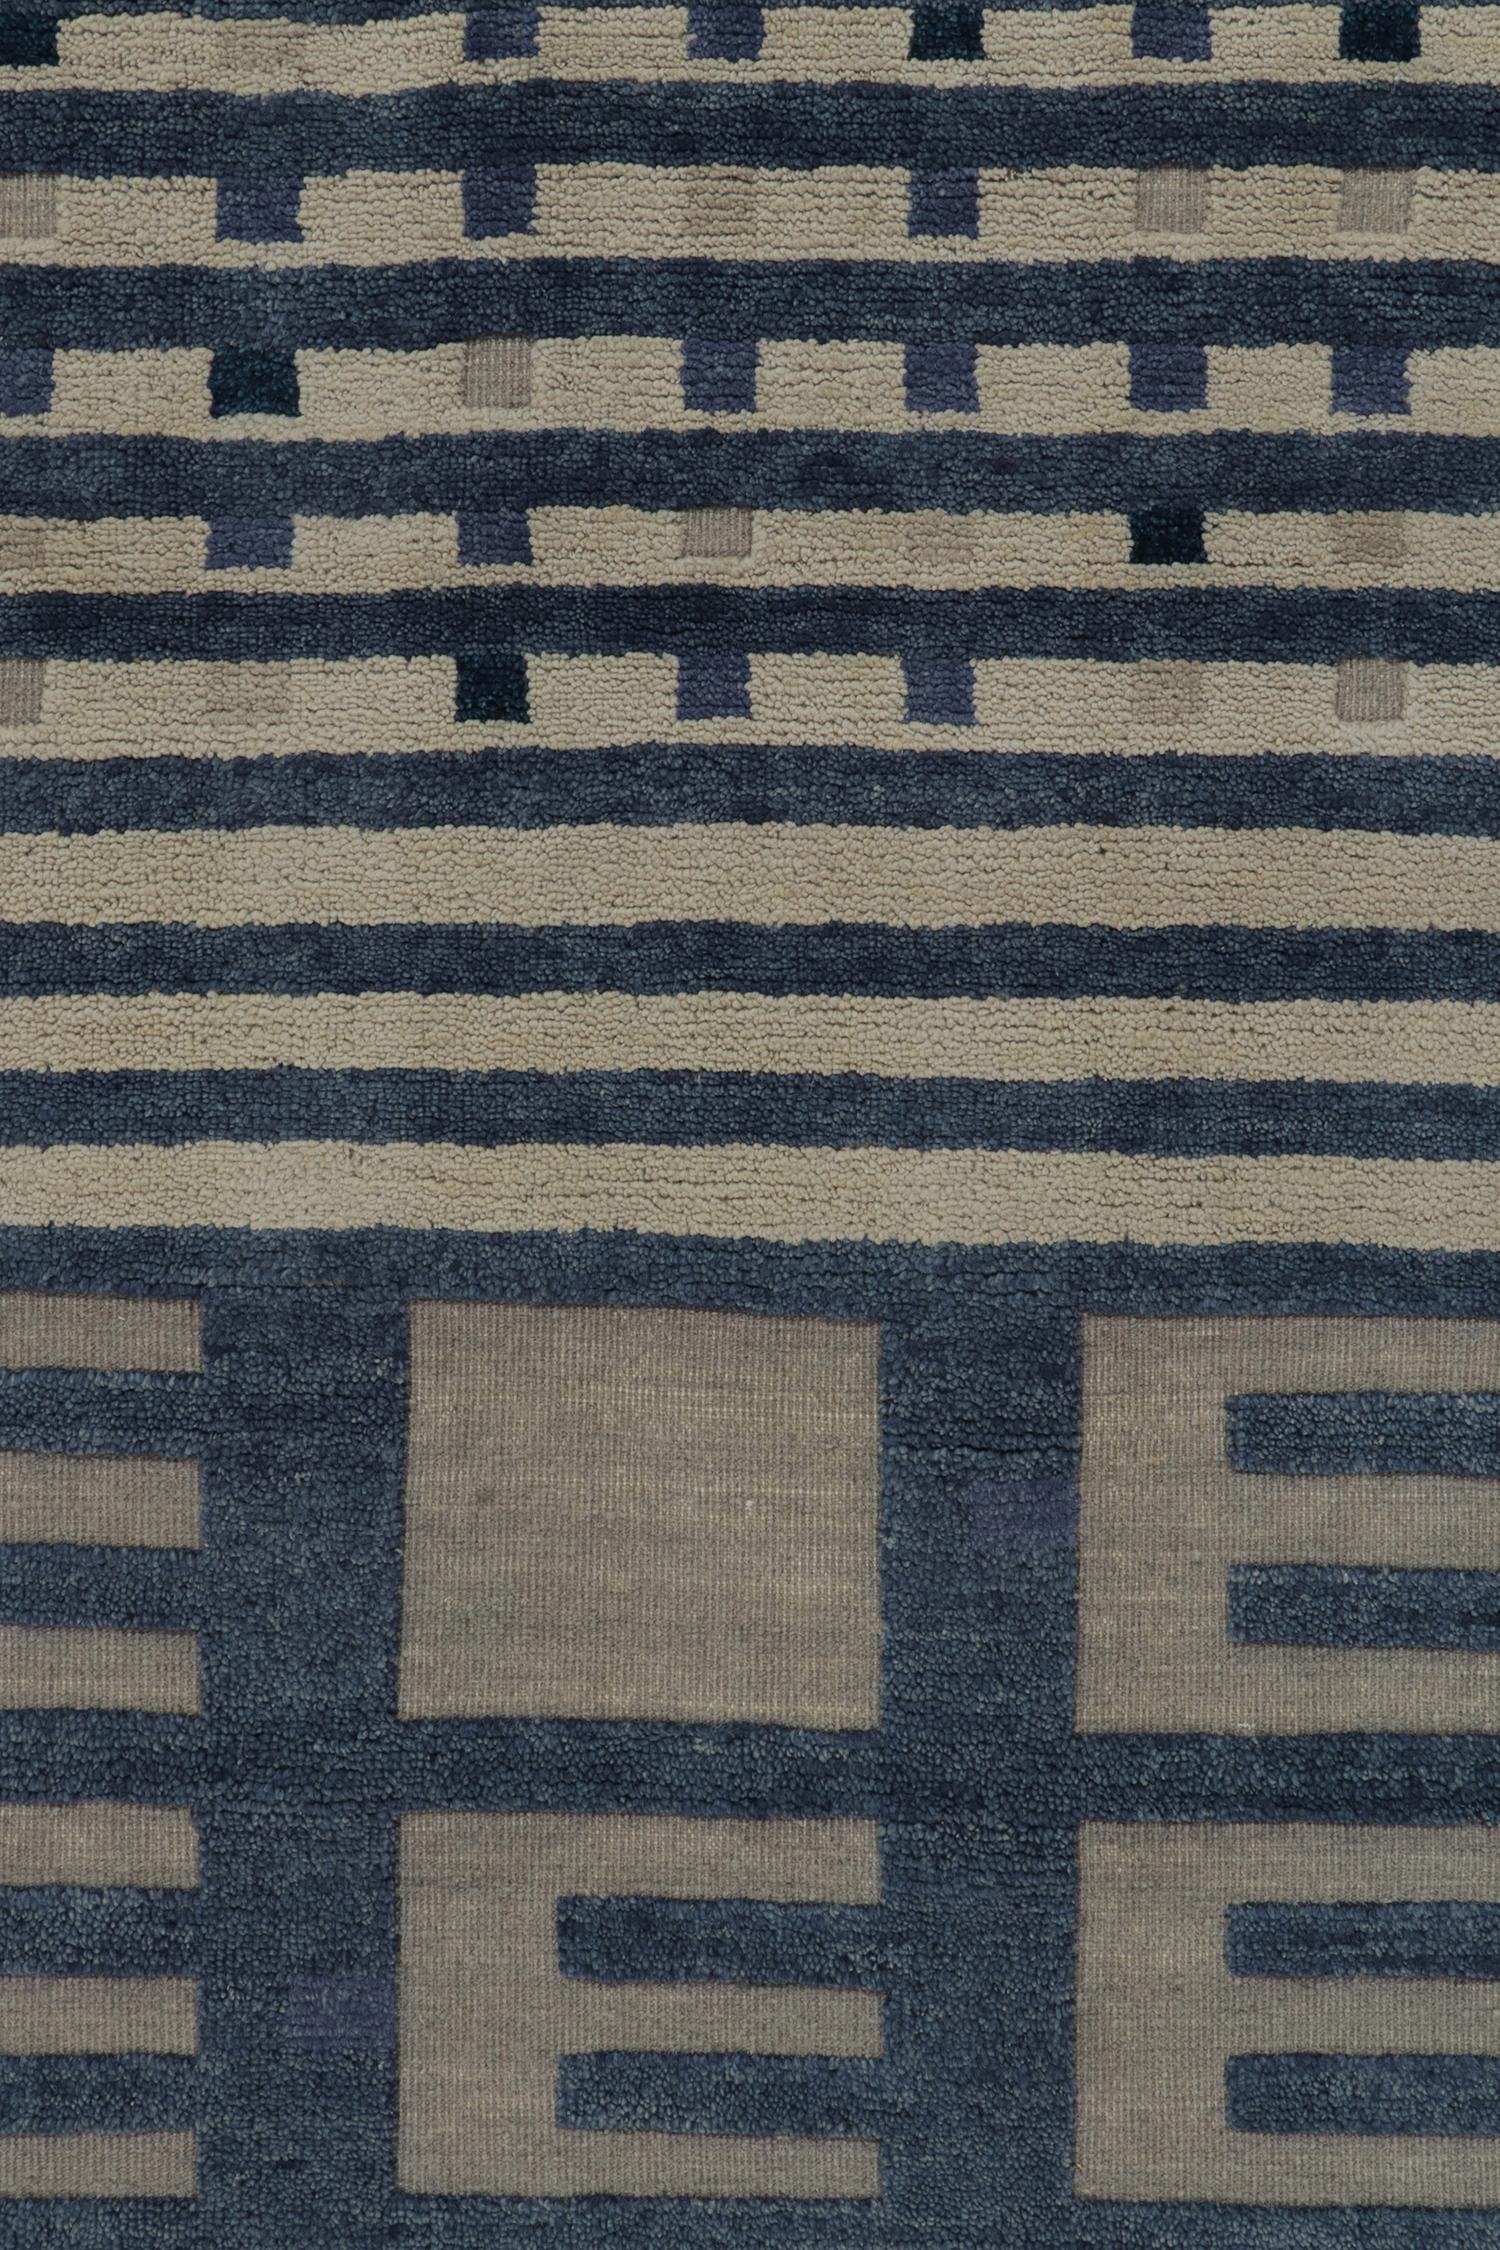 Rug & Kilim’s Swedish Deco Style Rug in Blue & Grey High-Low Geometric Patterns In New Condition For Sale In Long Island City, NY